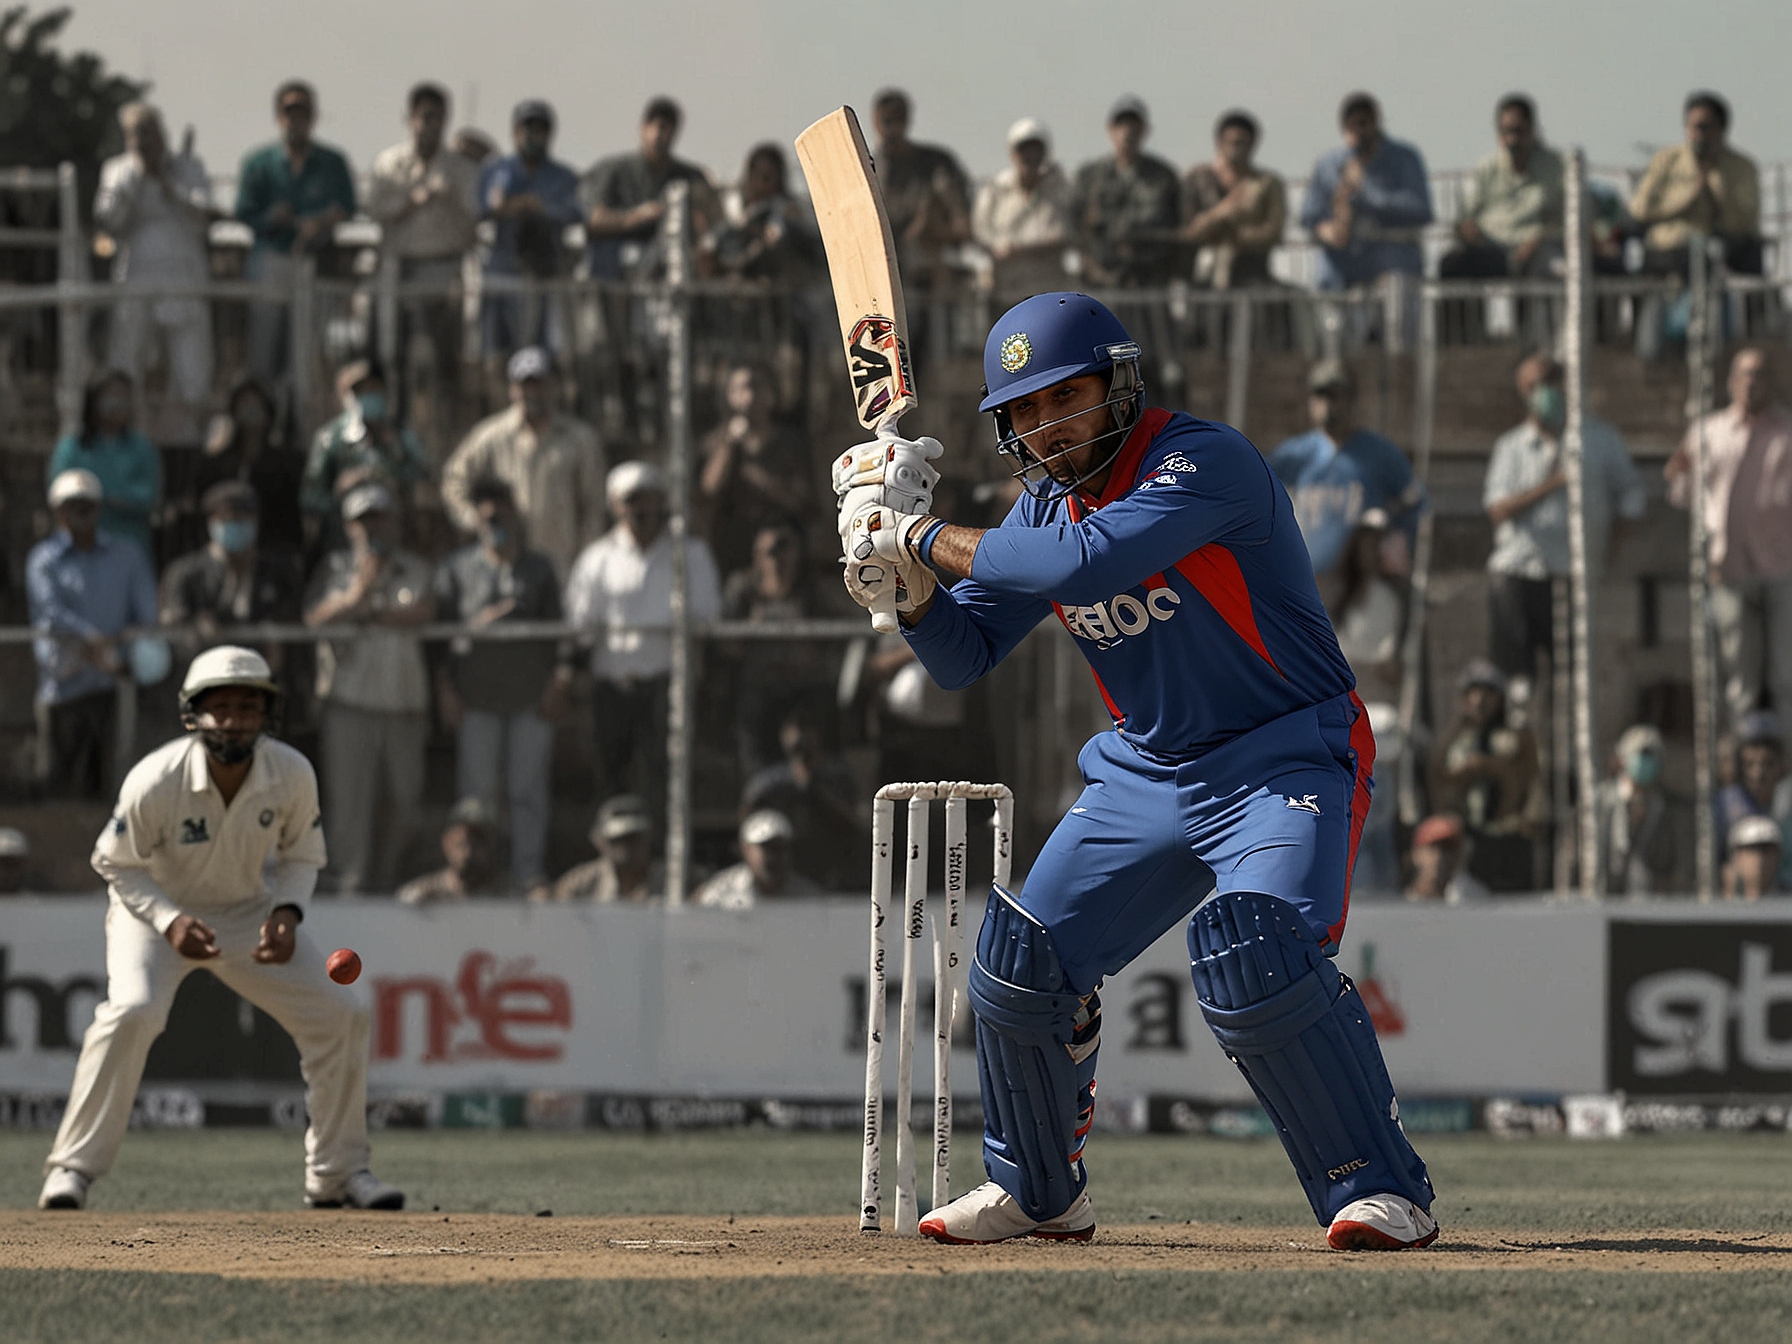 Afghan batsman, Mohammad Nabi, powerfully hitting a ball against a backdrop of enthusiastic fans, emphasizing Afghanistan's aggressive and fearless batting approach in high-stakes matches.